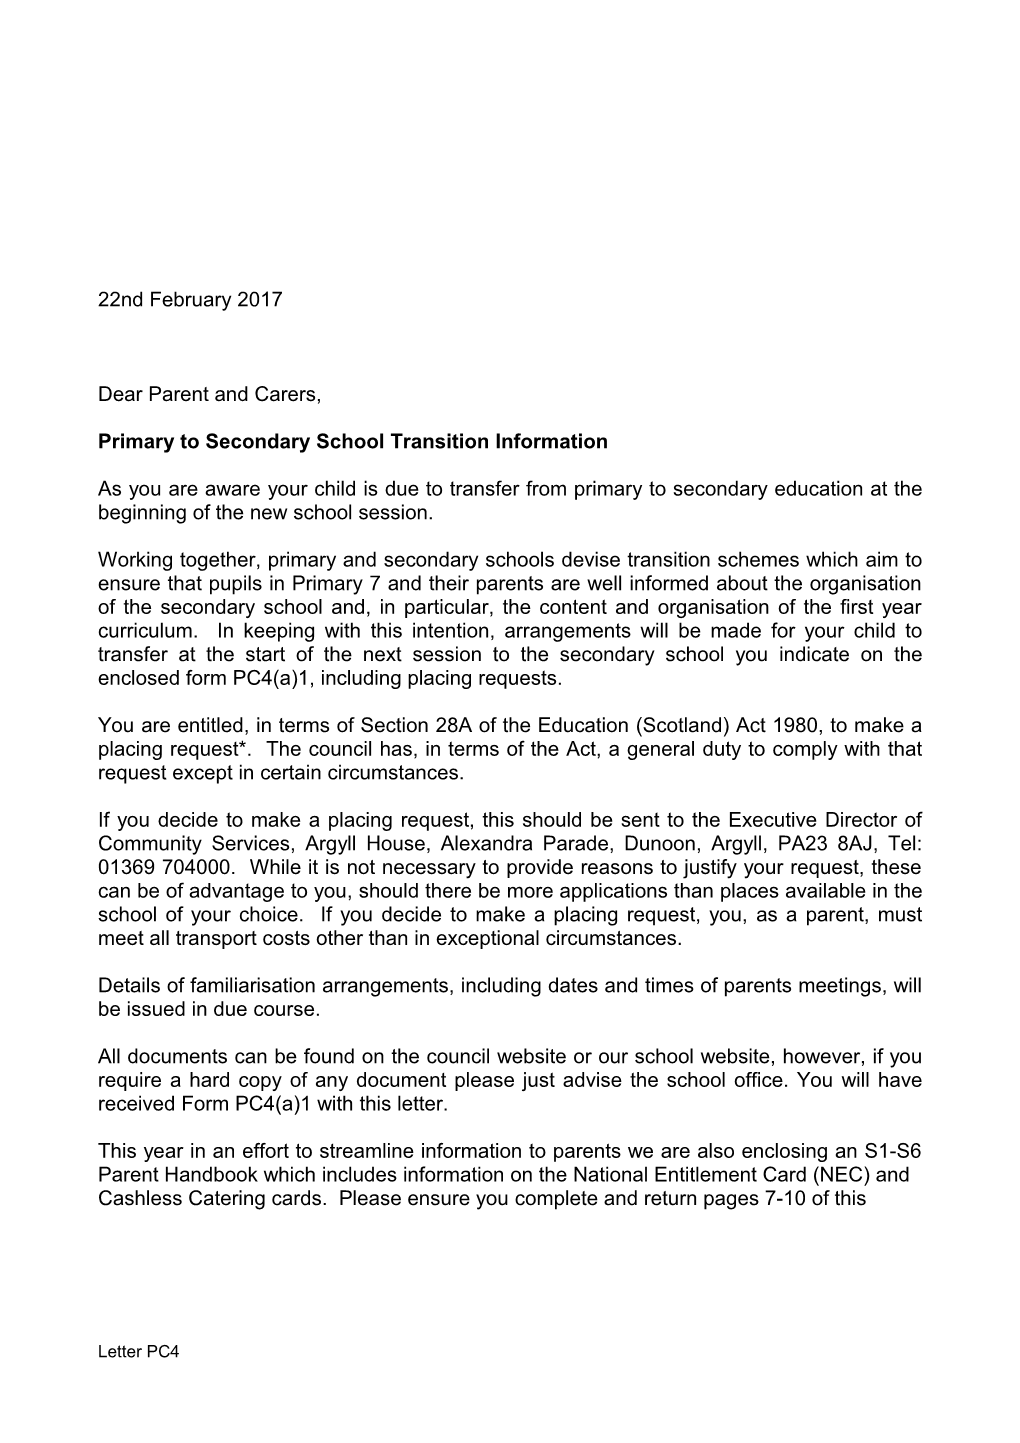 Primary to Secondary School Transition Information